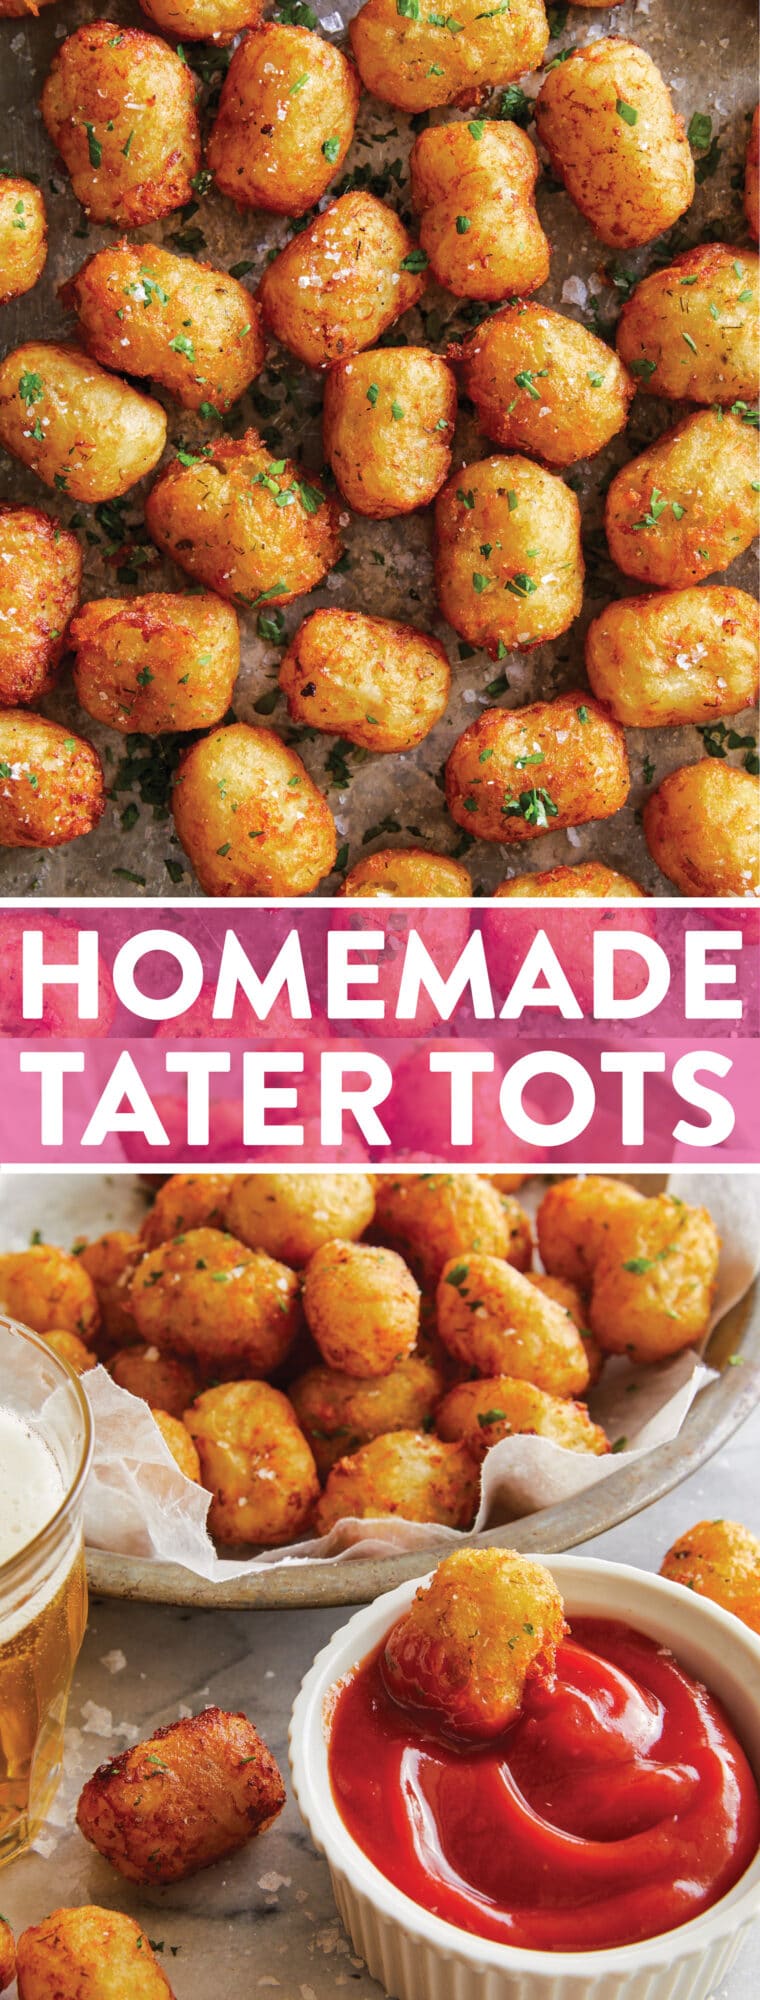 Homemade Tater Tots - Say goodbye to those frozen bags of tots! This homemade version is easy, freezer-friendly and better than store-bought!